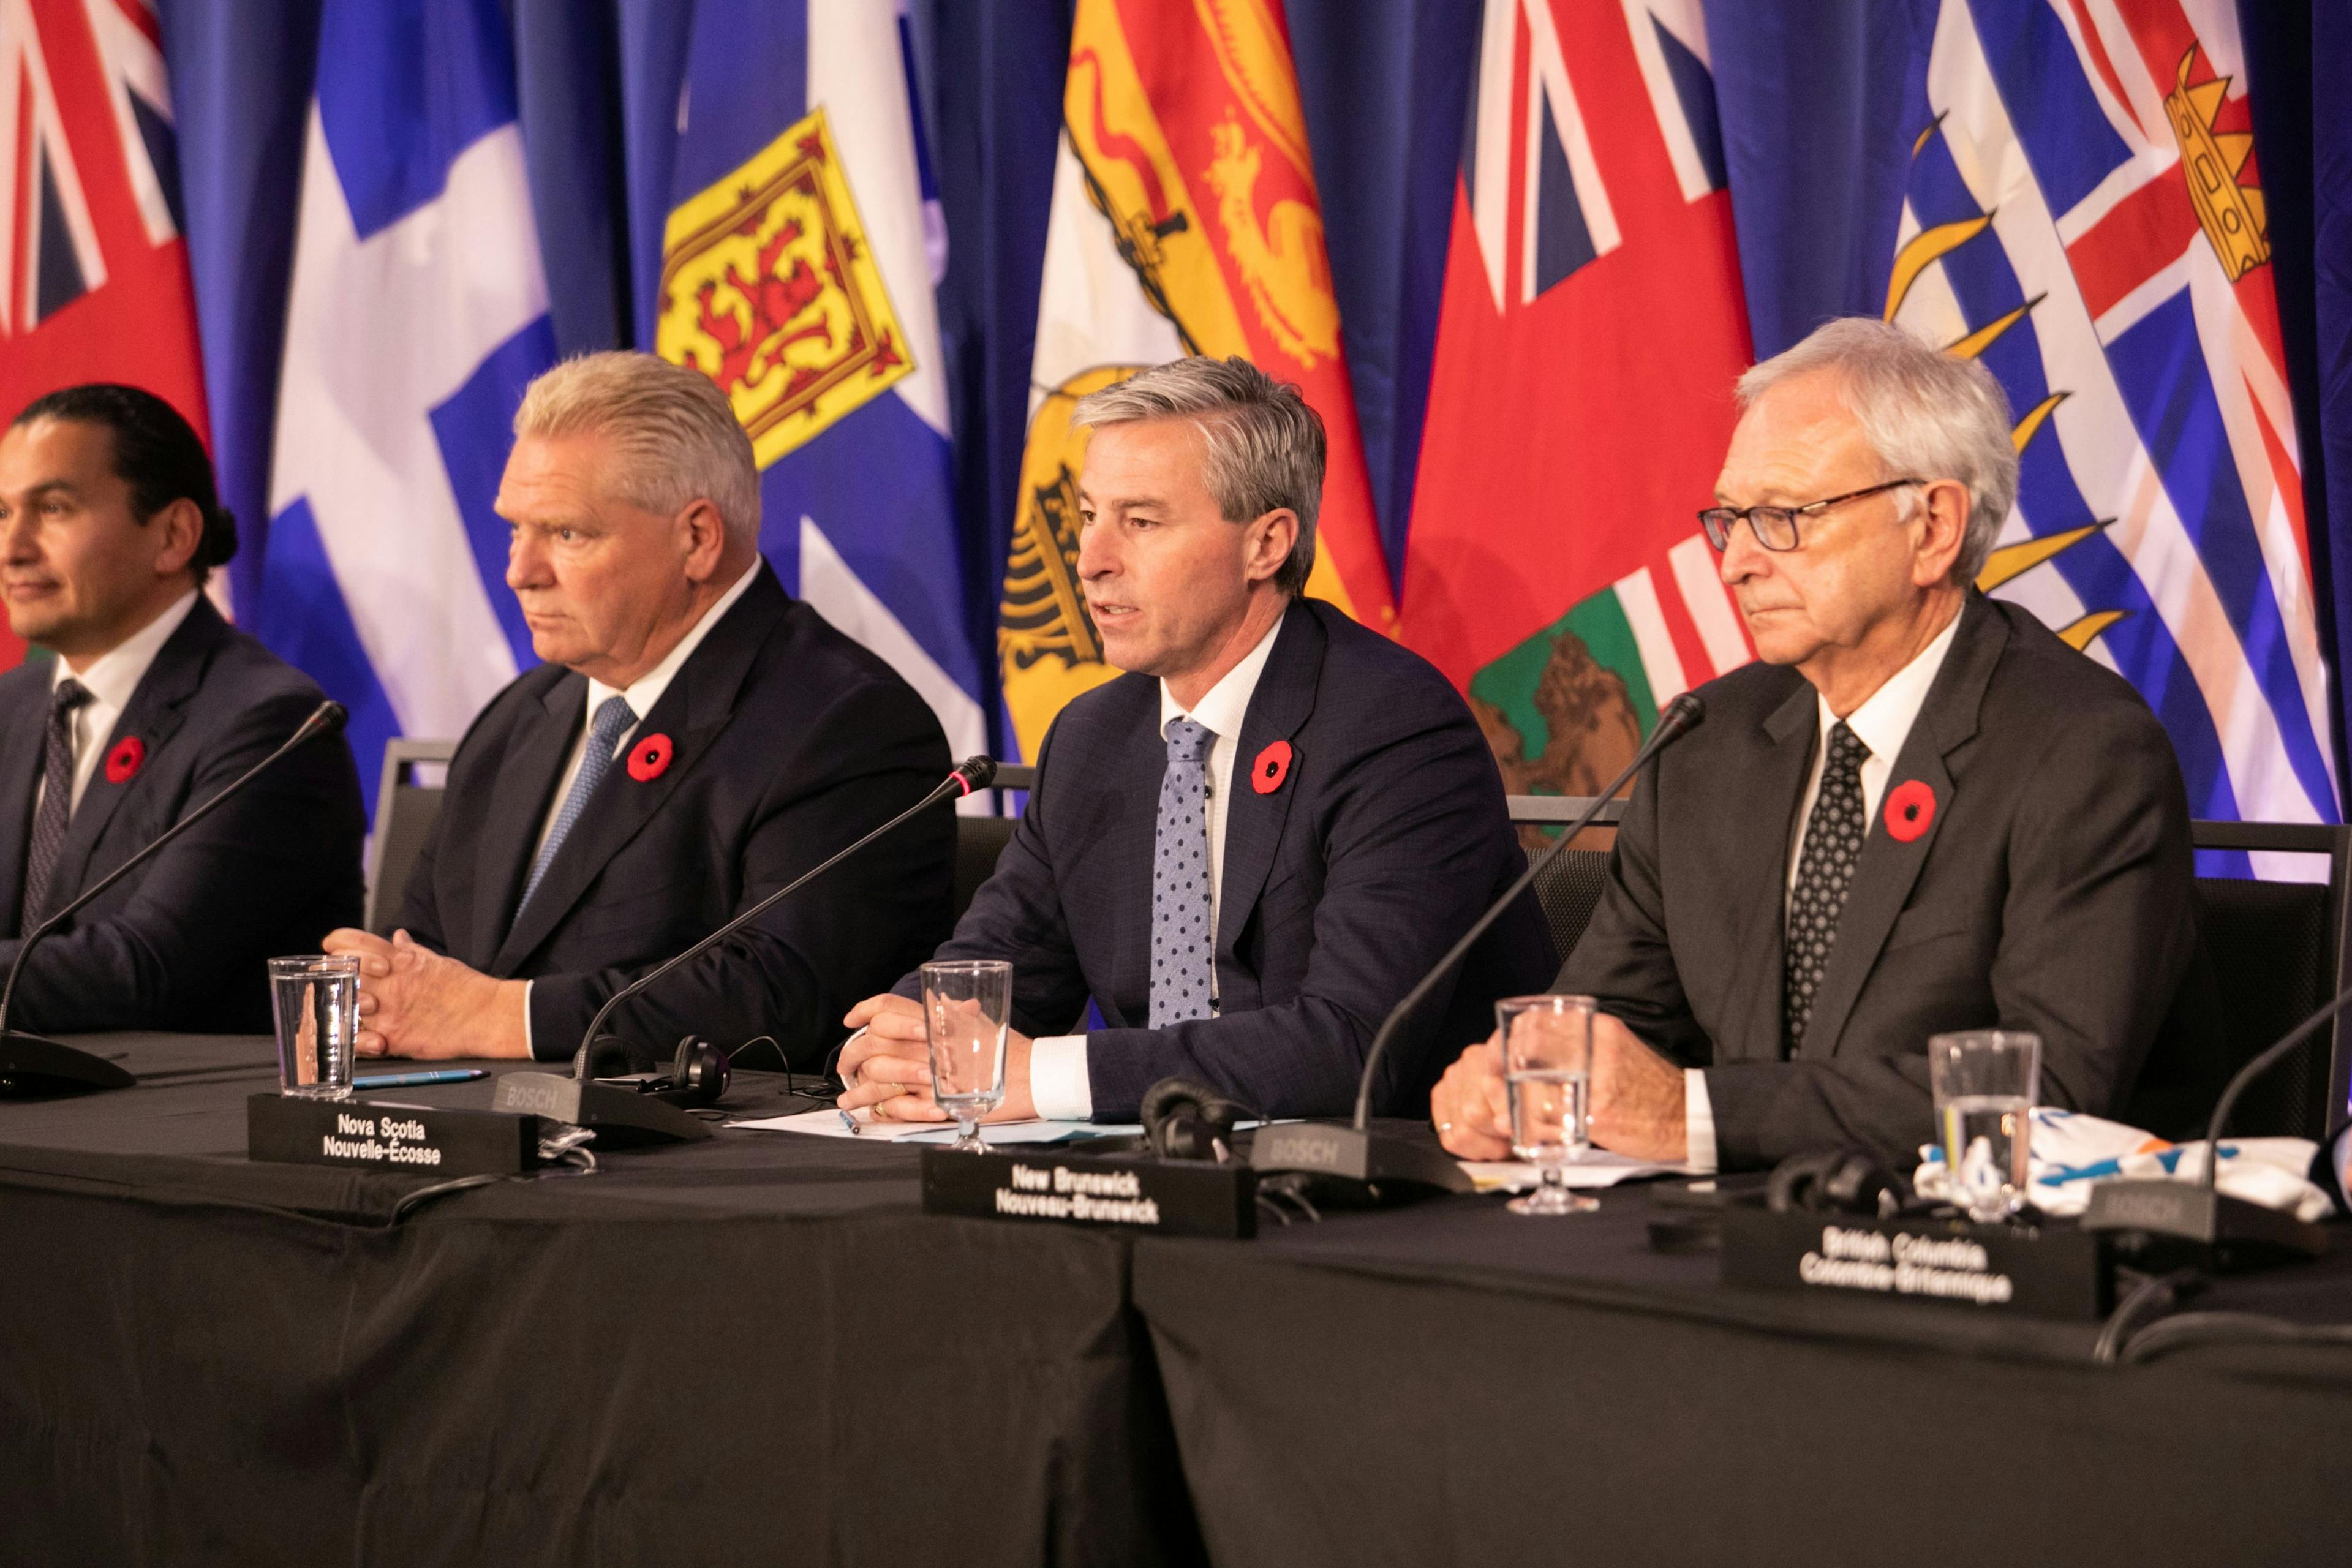 Premiers say pharmacare wasn’t discussed at health summit, blaming lack of details from Ottawa